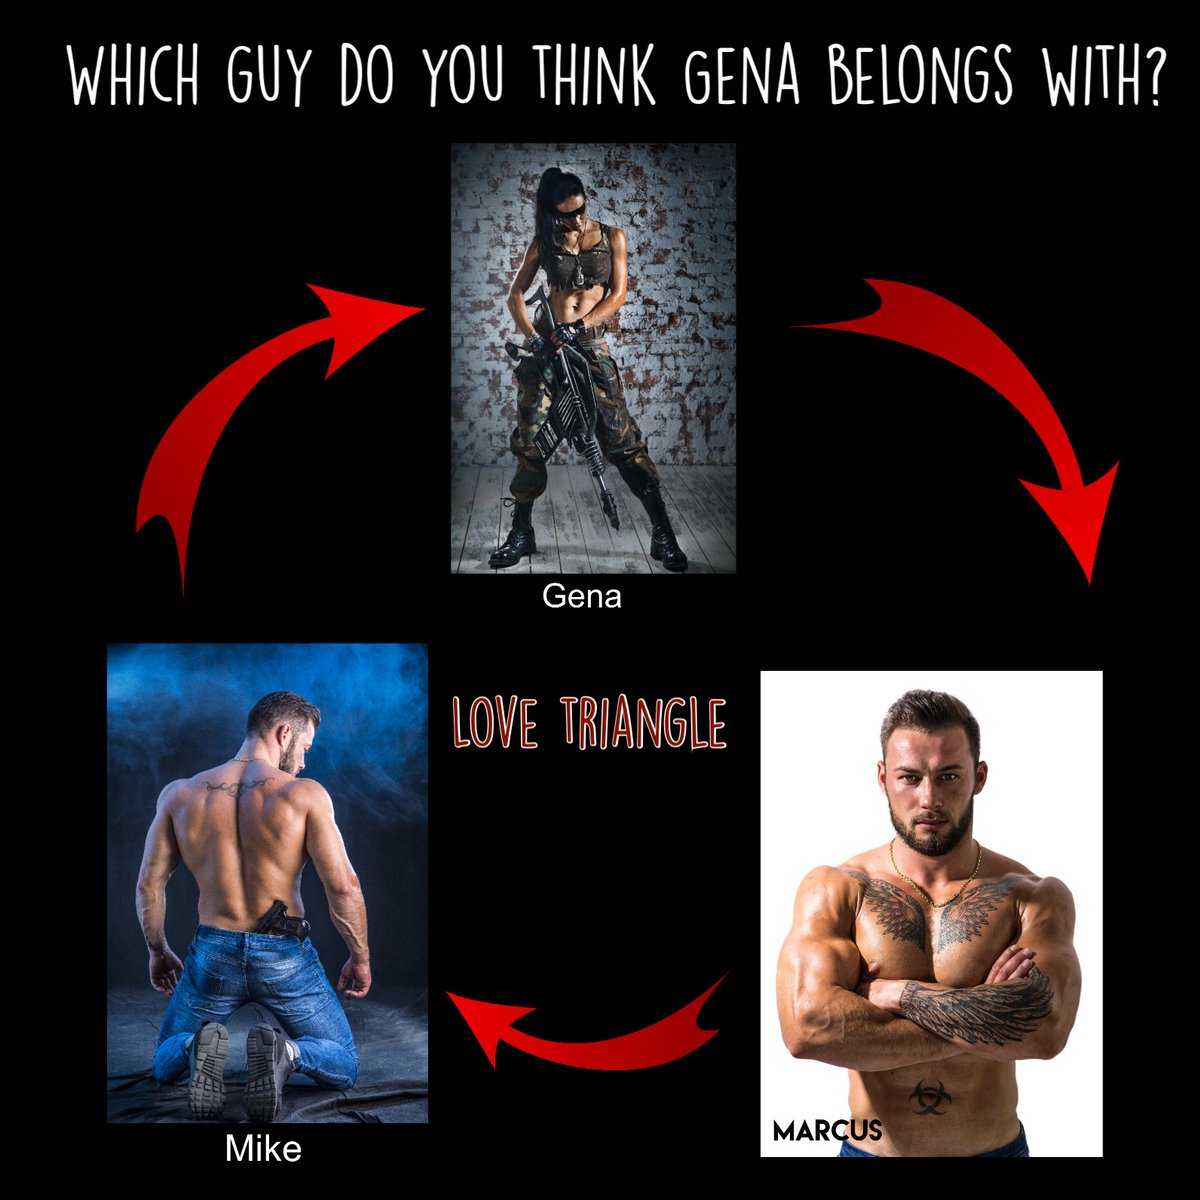 #GenavinesFaith
Gena fans, which one do you think she should be with?
💕Mike
💕Marcus 
💕Both
#paranormalromance #lovetriangle #dystopian #cleanromance #Drama